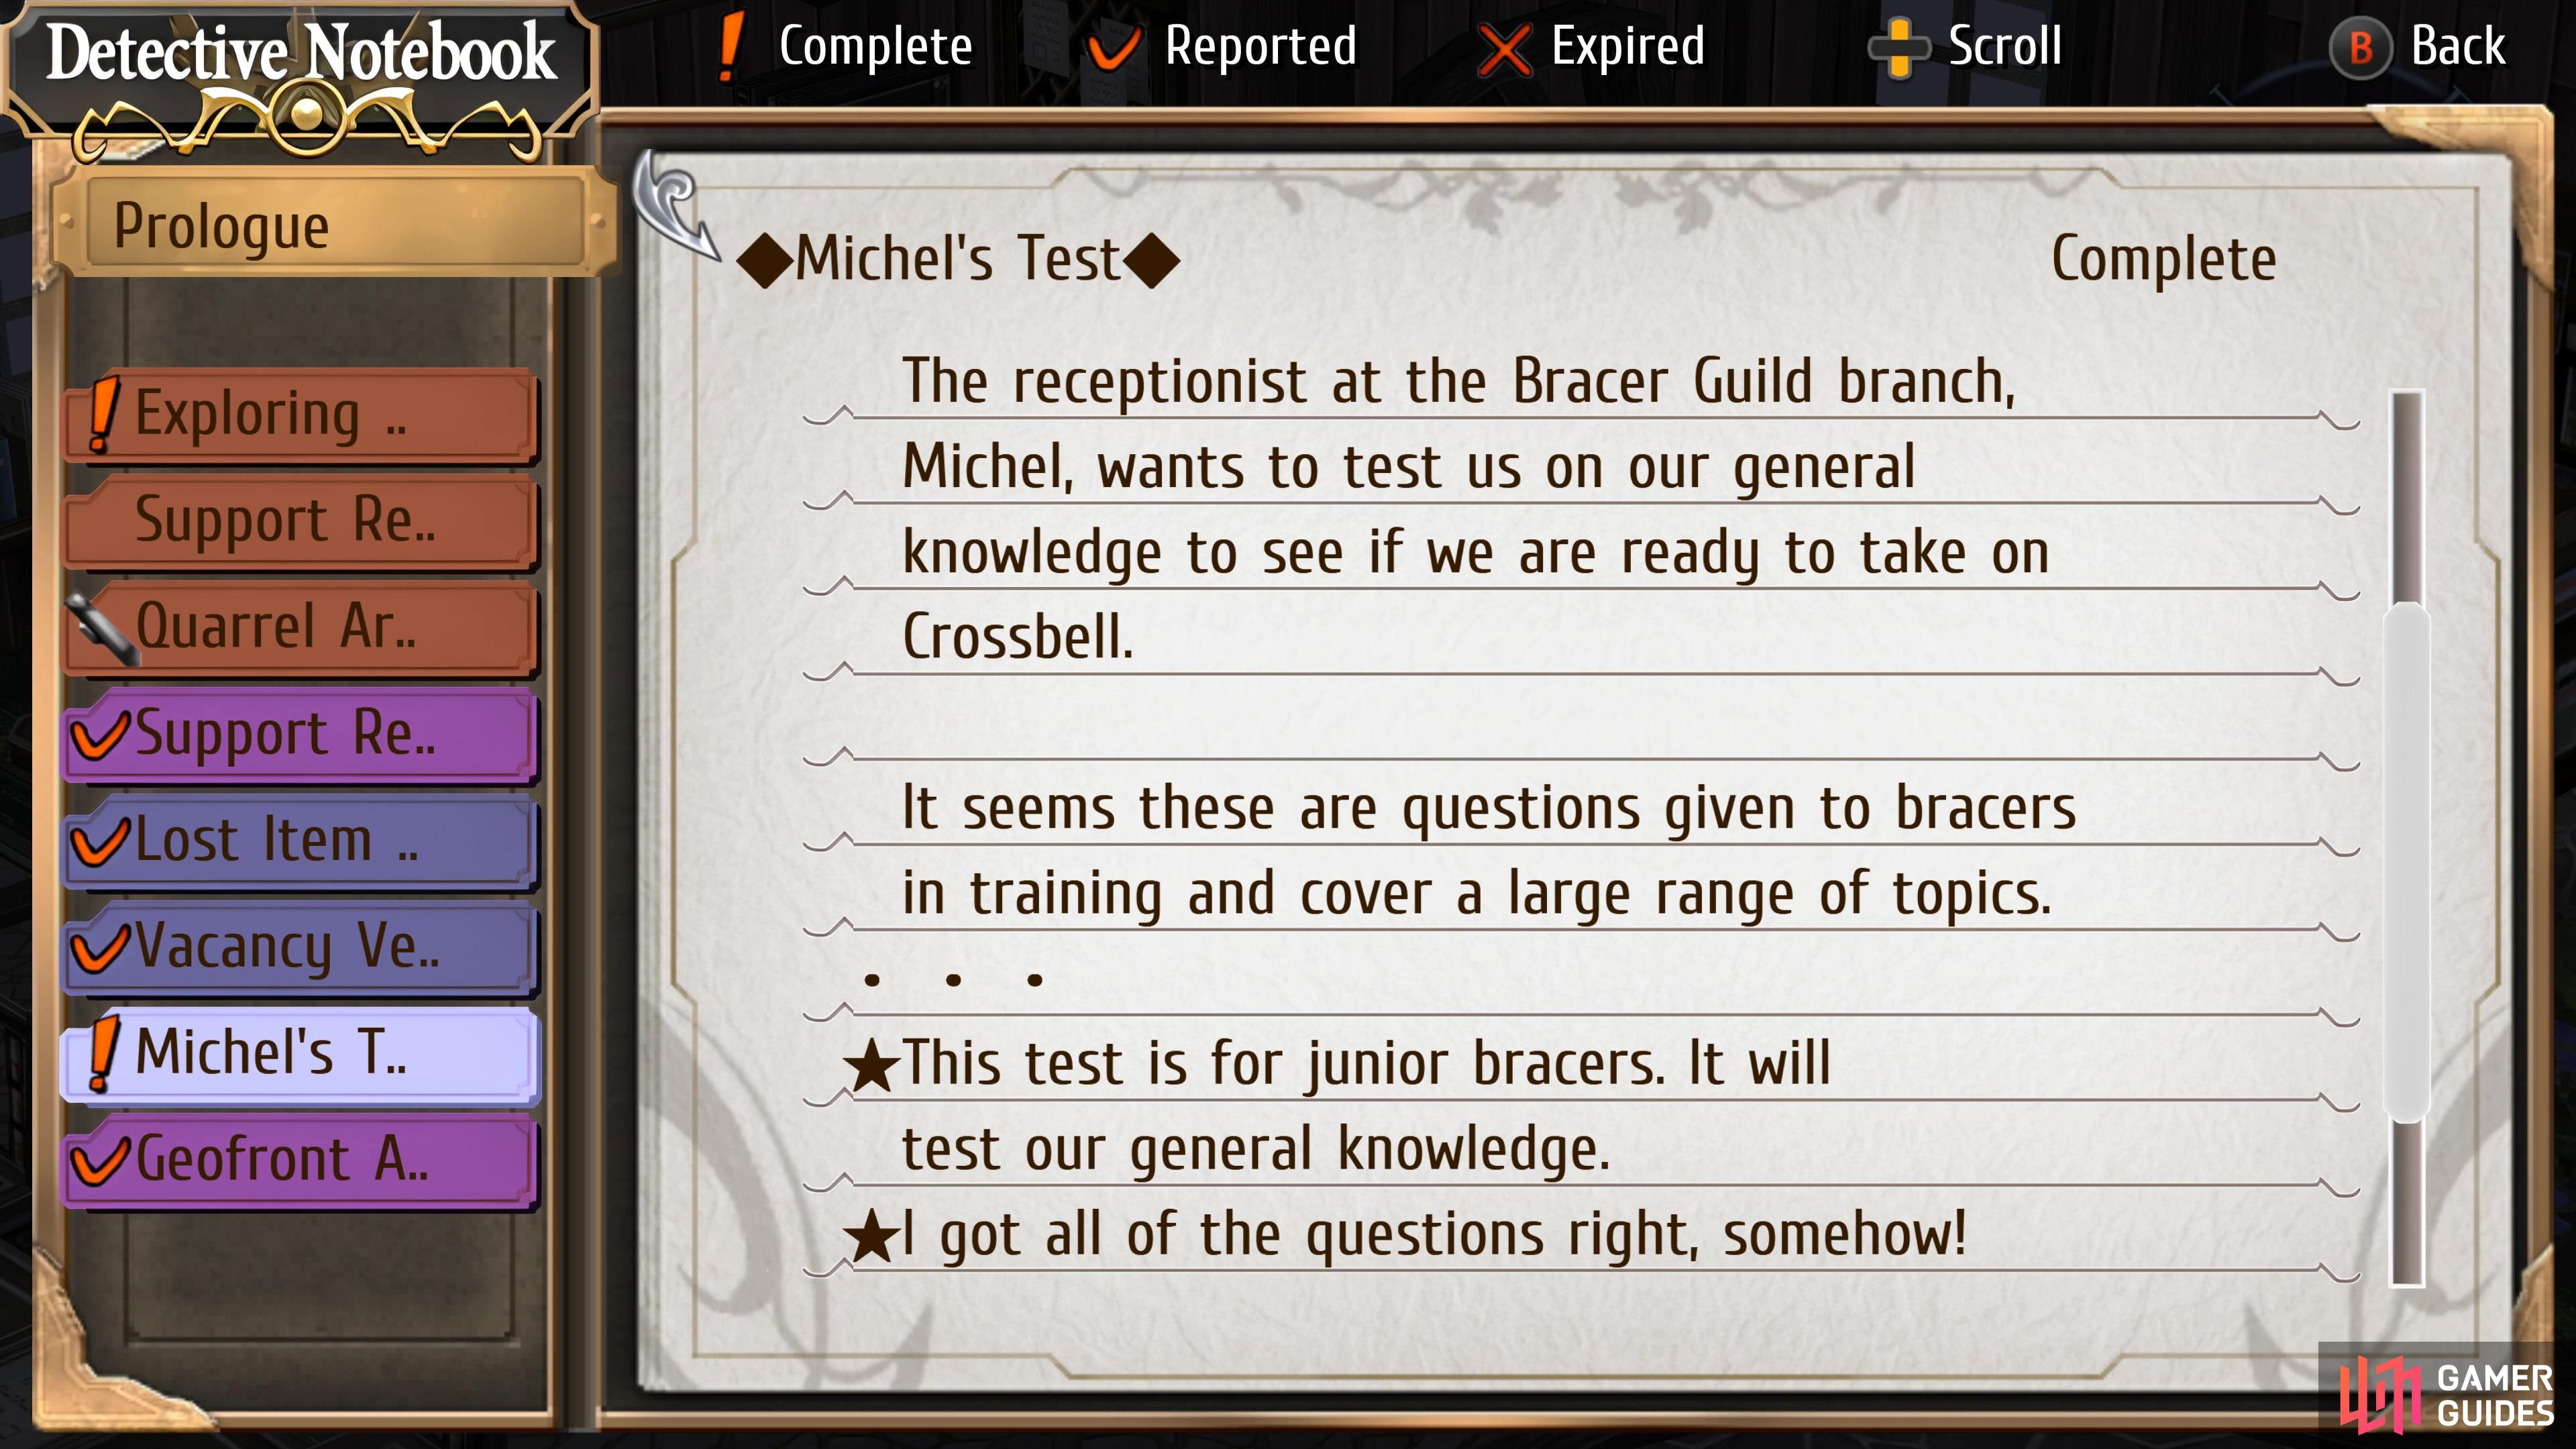 Michel’s Test is a hidden Request and won’t appear on the Orbal Computer to accept, you must seek it out on your own.